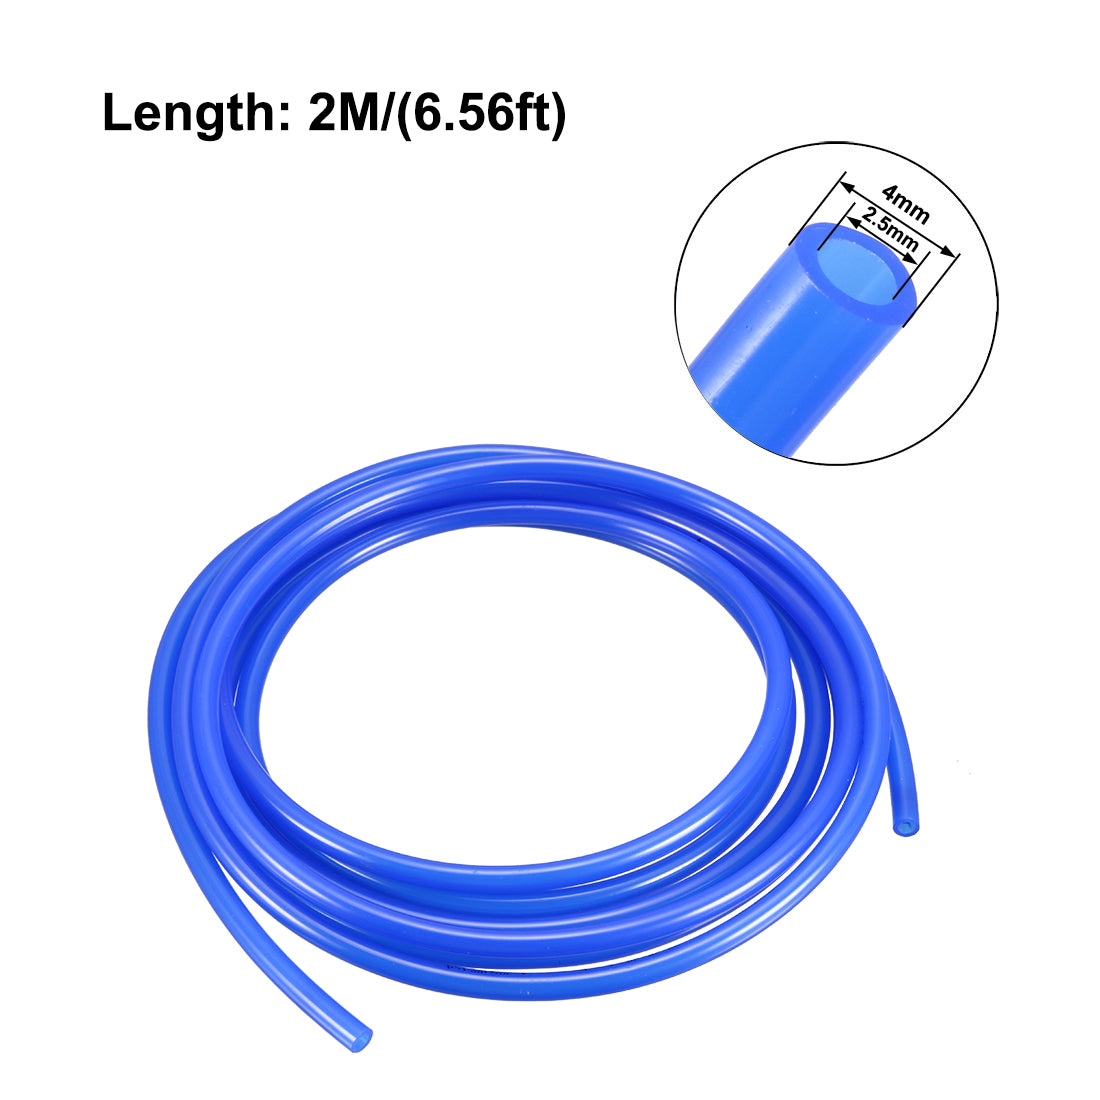 uxcell Uxcell Pneumatic Hose Tubing,4mm OD 2.5mm ID,Polyurethane PU Air Hose Pipe Tube,2 Meter 6.56ft,Blue